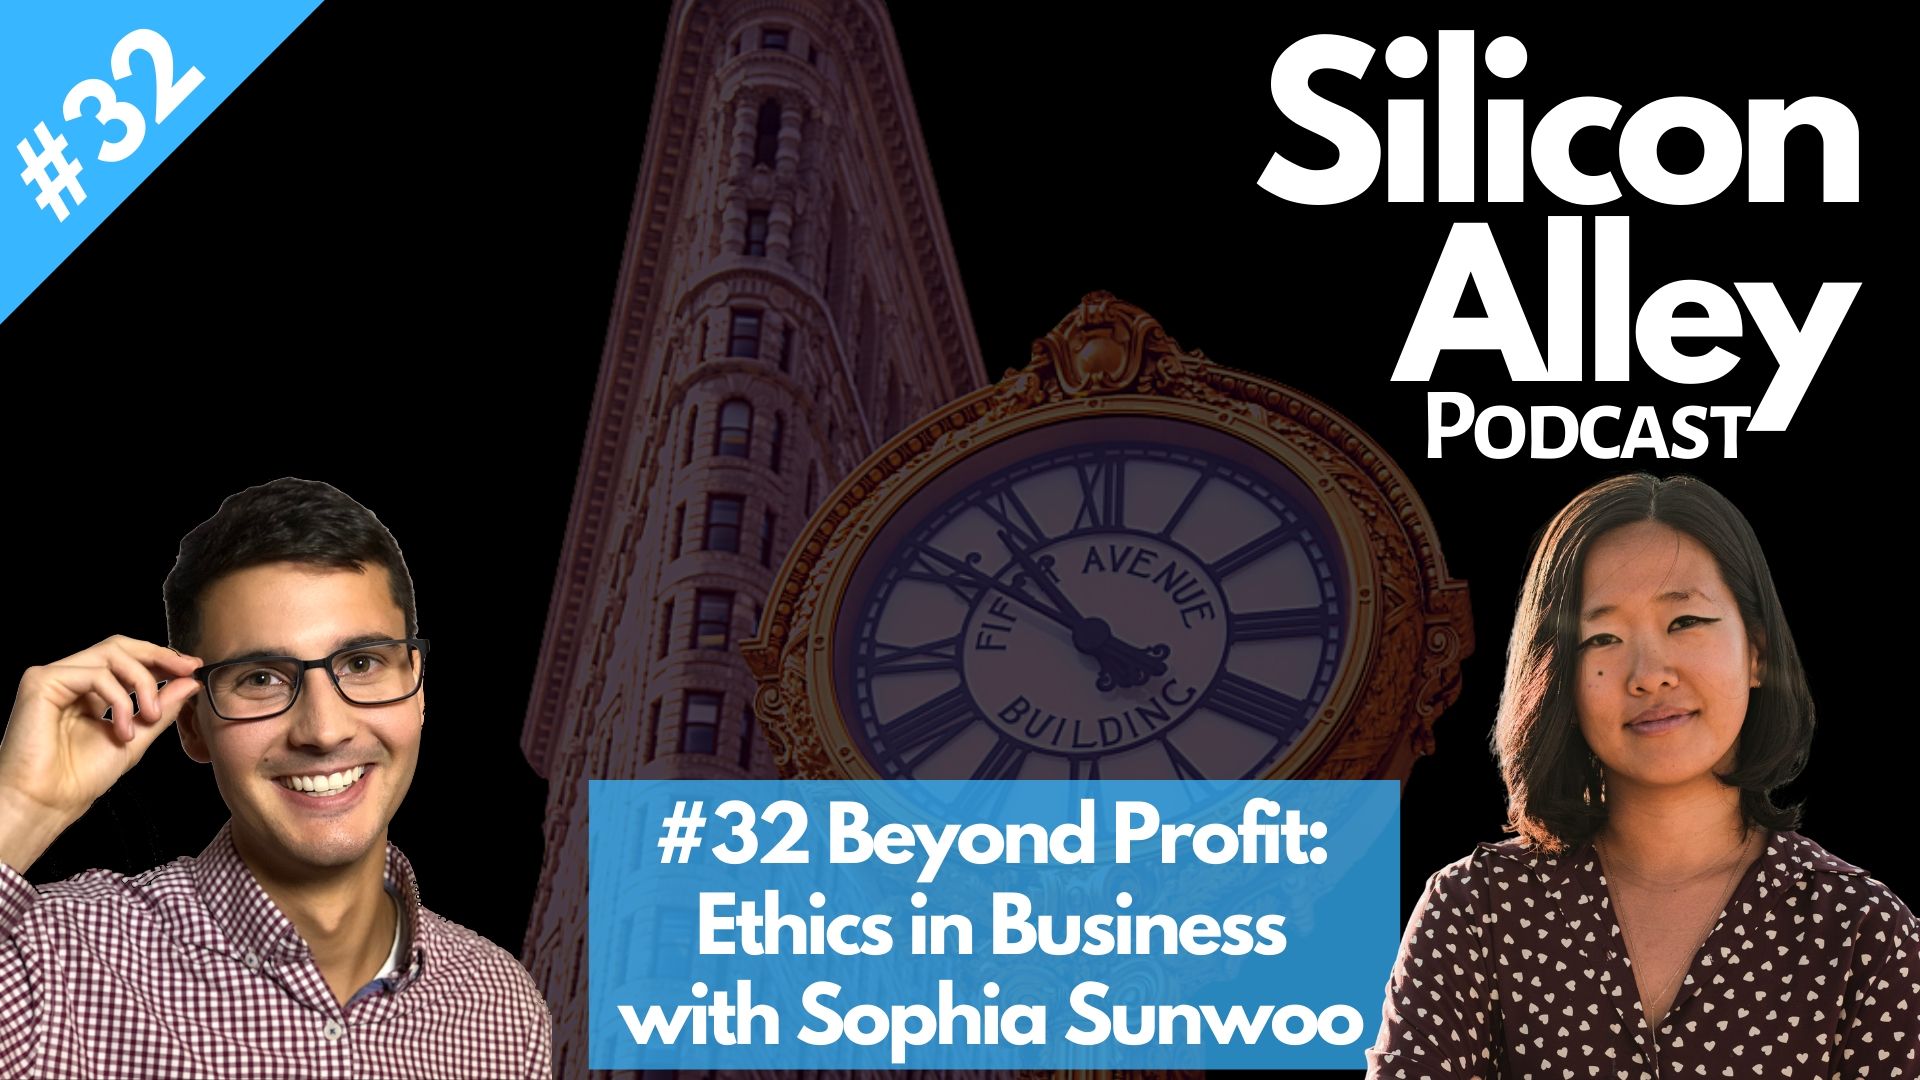 Episode 32 Beyond Profit Business Ethics with Sophia Sunwoo Serial Entrepreneur Silicon Alley Podcast Cover